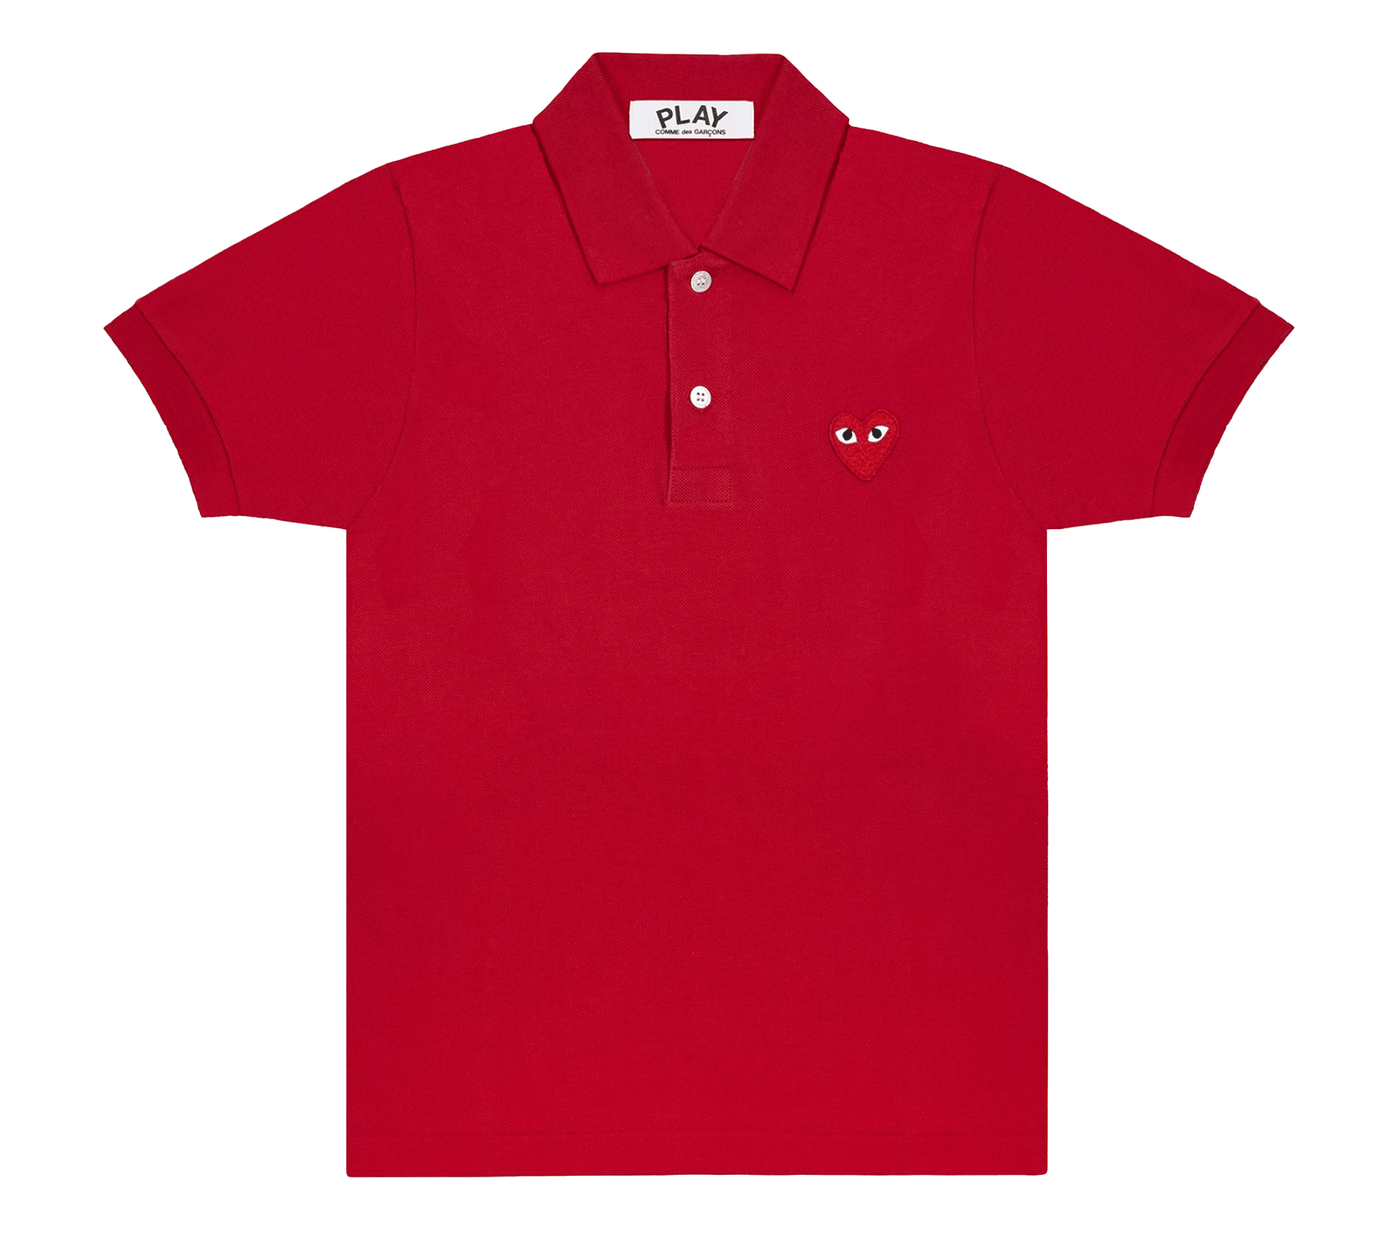    Comme-des-Garcons-Play-Polo-Shirt-with-Red-Emblem-Men-Red-1